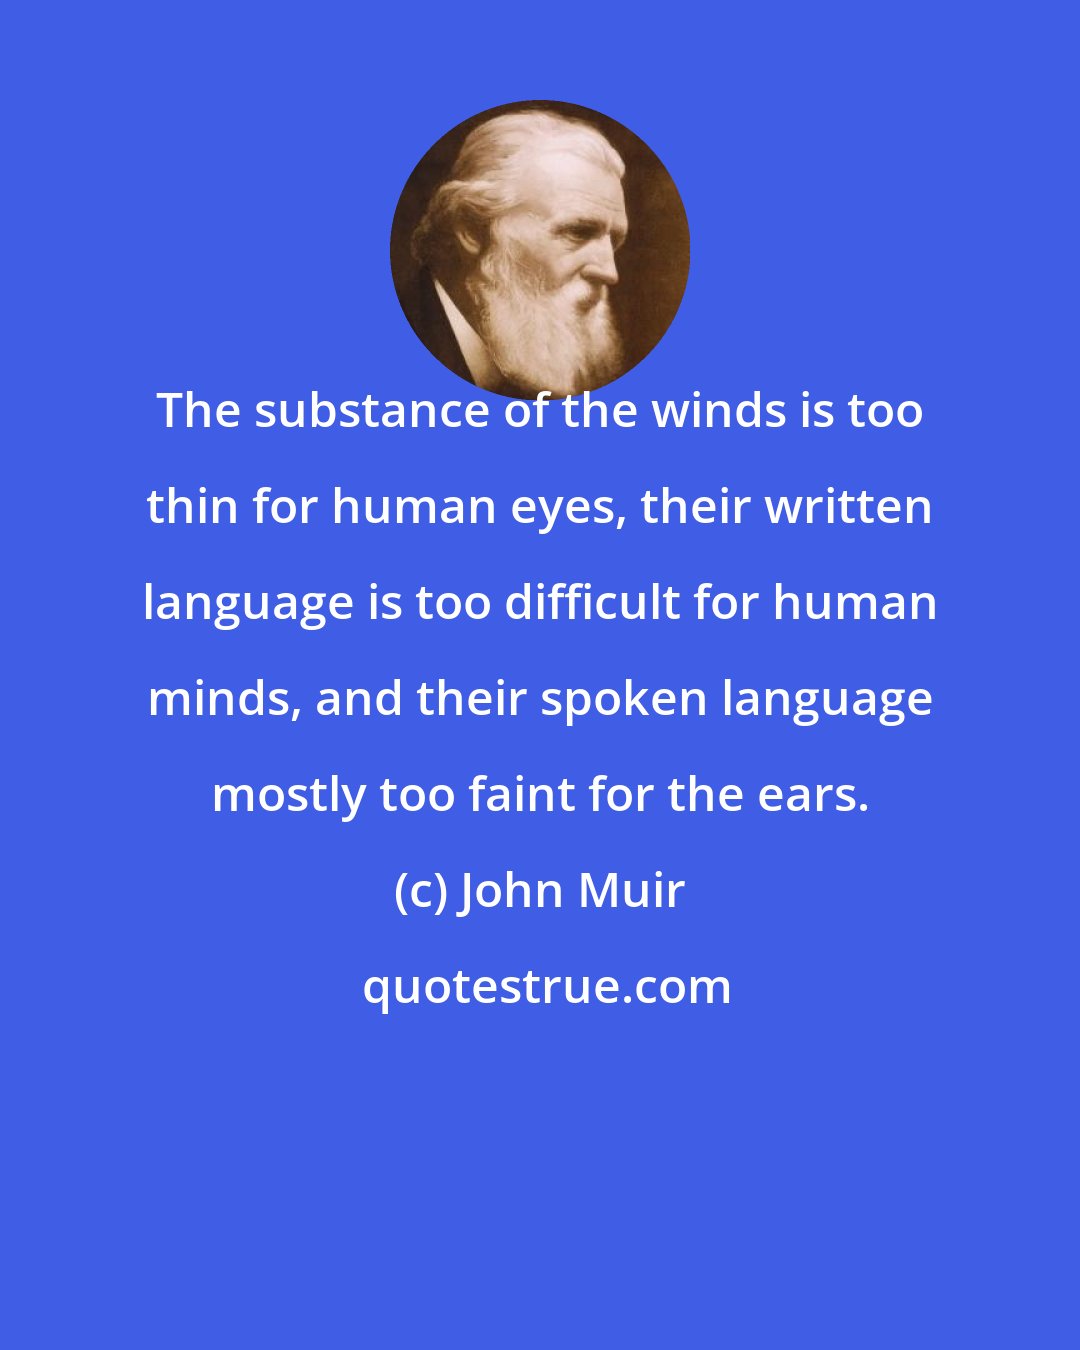 John Muir: The substance of the winds is too thin for human eyes, their written language is too difficult for human minds, and their spoken language mostly too faint for the ears.